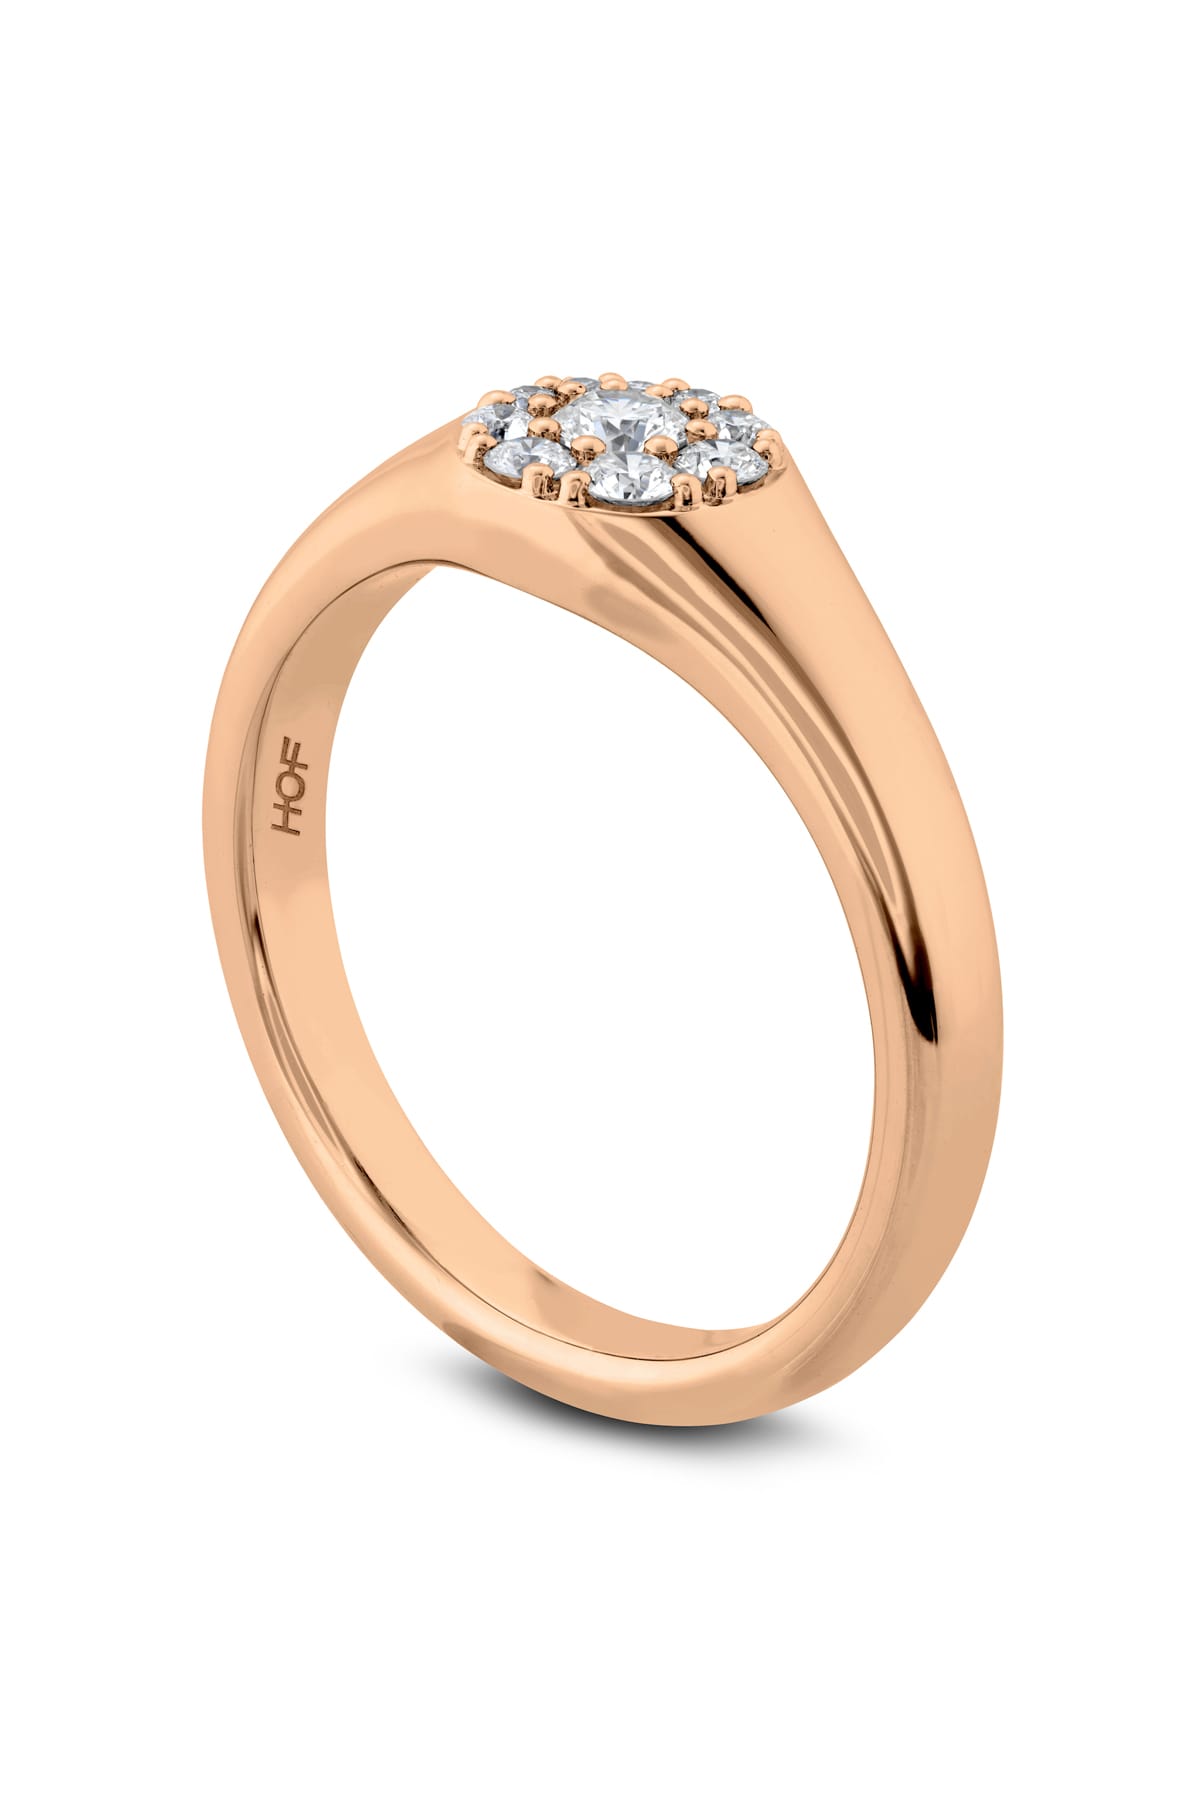 Tessa Circle Signet Ring From Hearts On Fire available at LeGassick Diamonds and Jewellery Gold Coast, Australia.